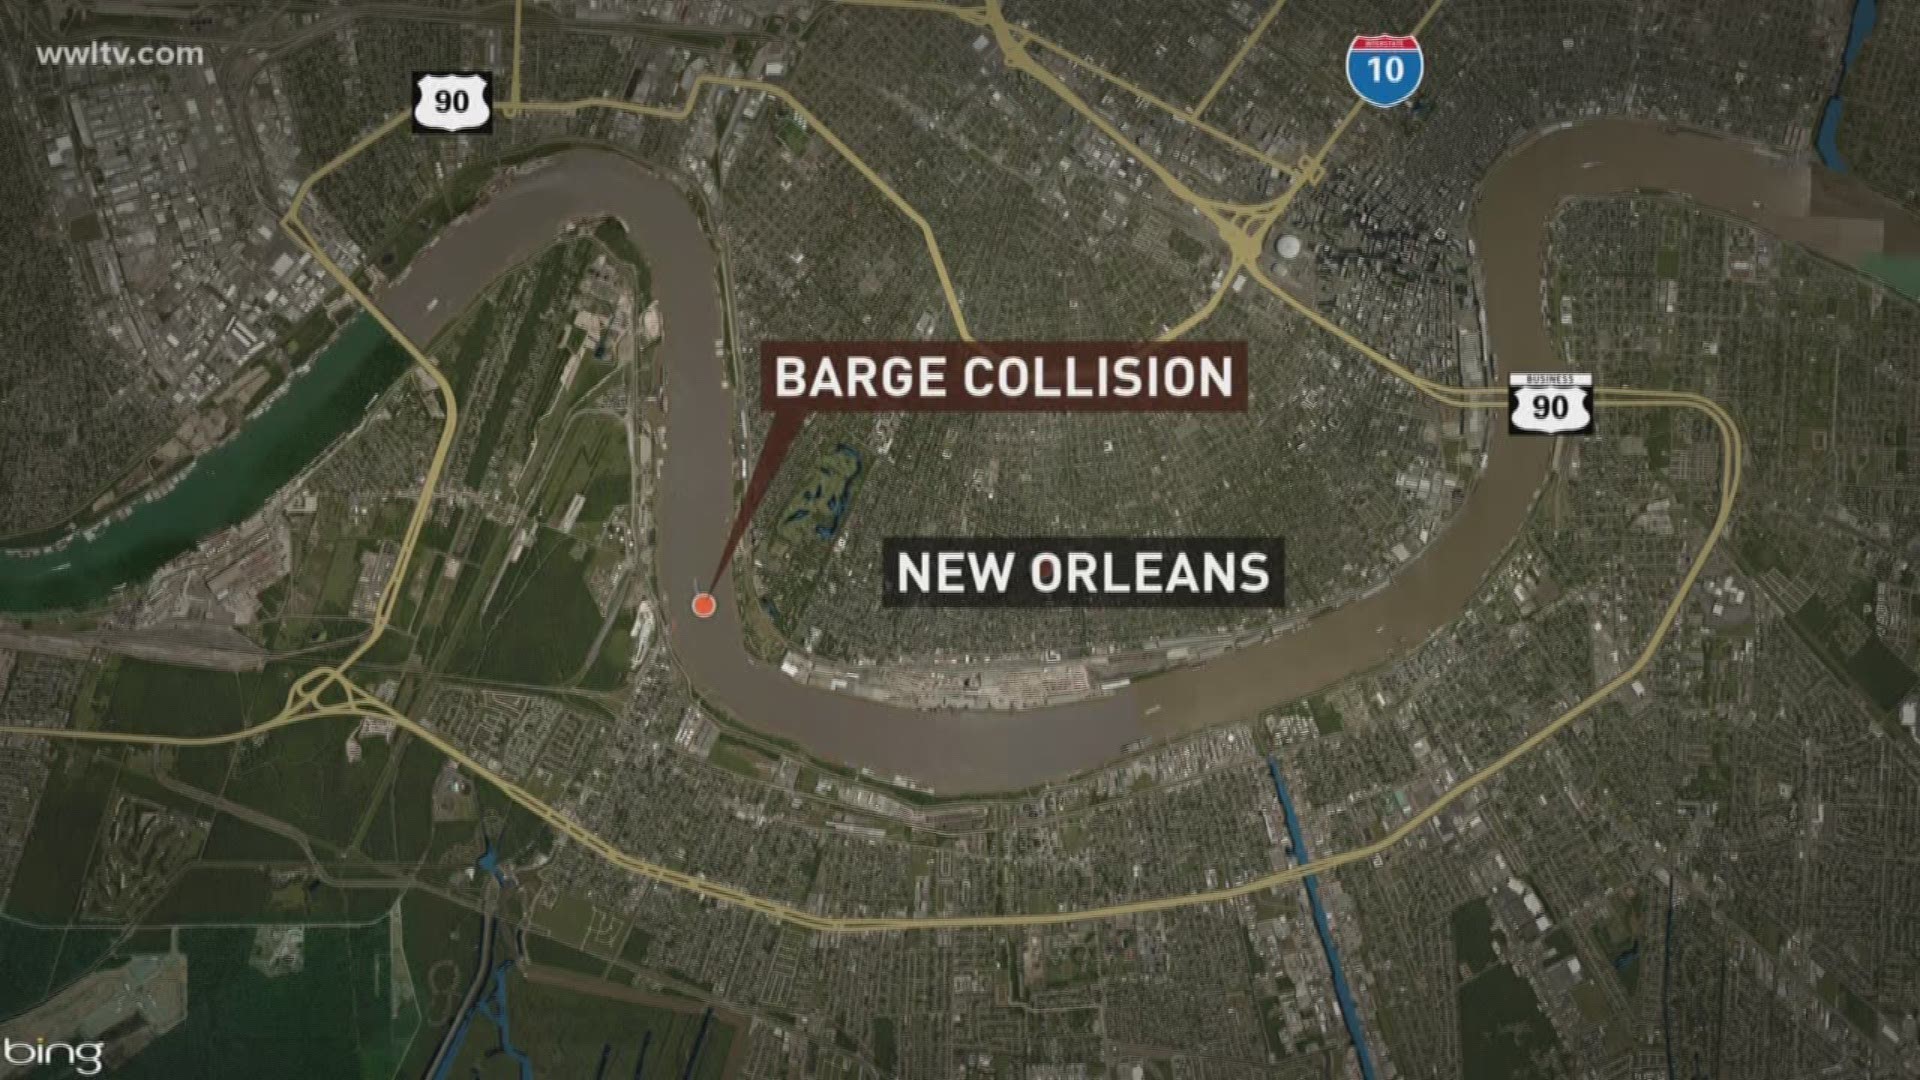 According to officials, 14 barges were involved in the crash and, thankfully, nobody was injured.